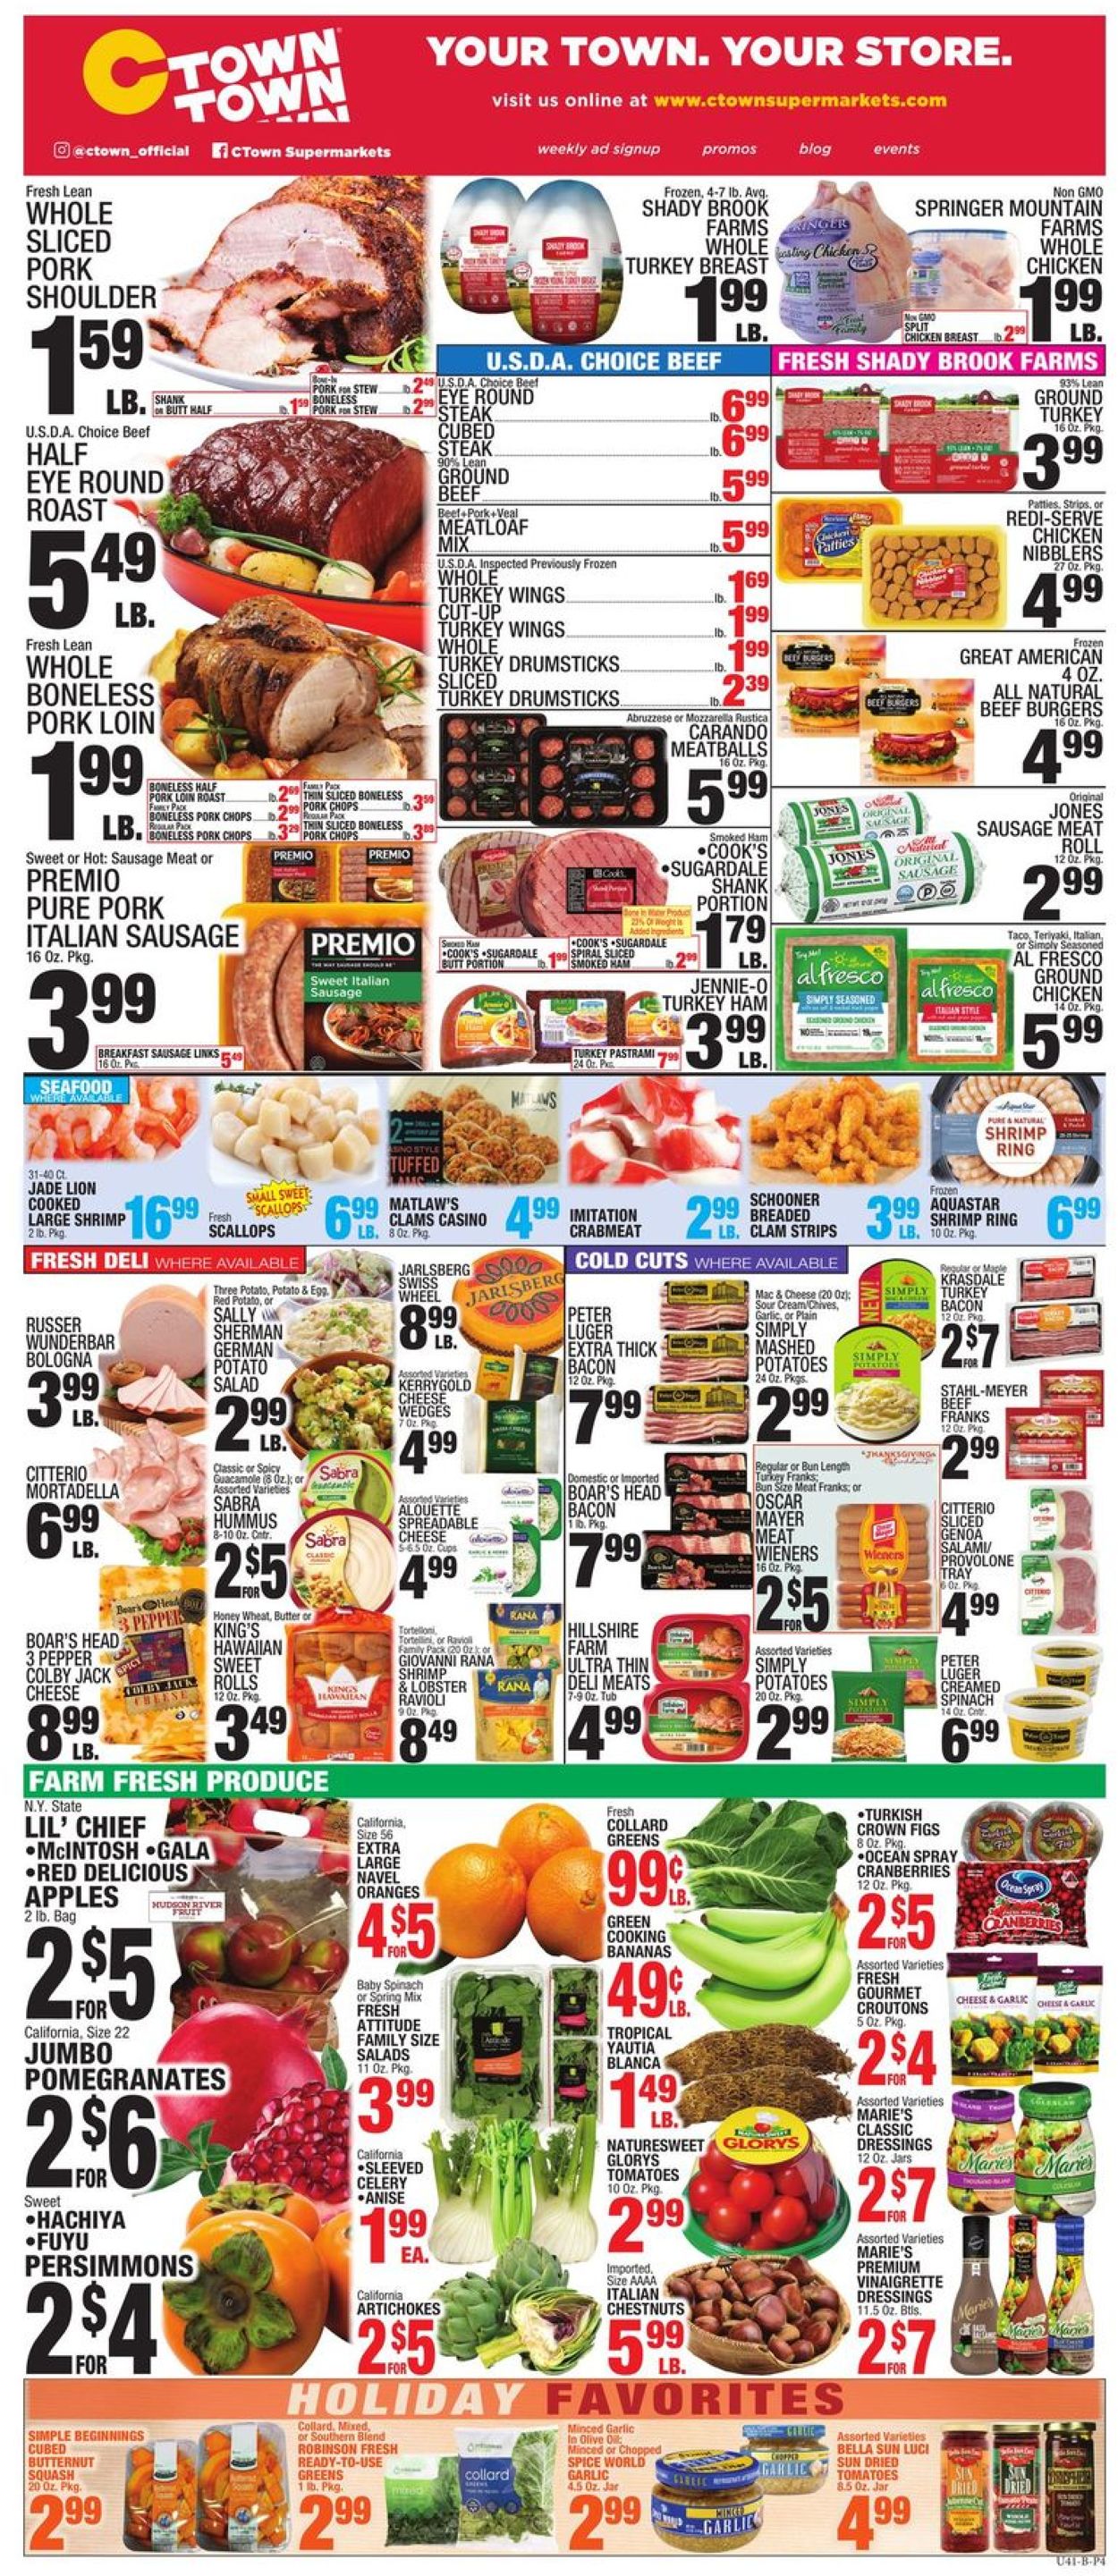 C-Town THANKSGIVING 2021 Weekly Ad Circular - valid 11/19-11/25/2021 (Page 4)